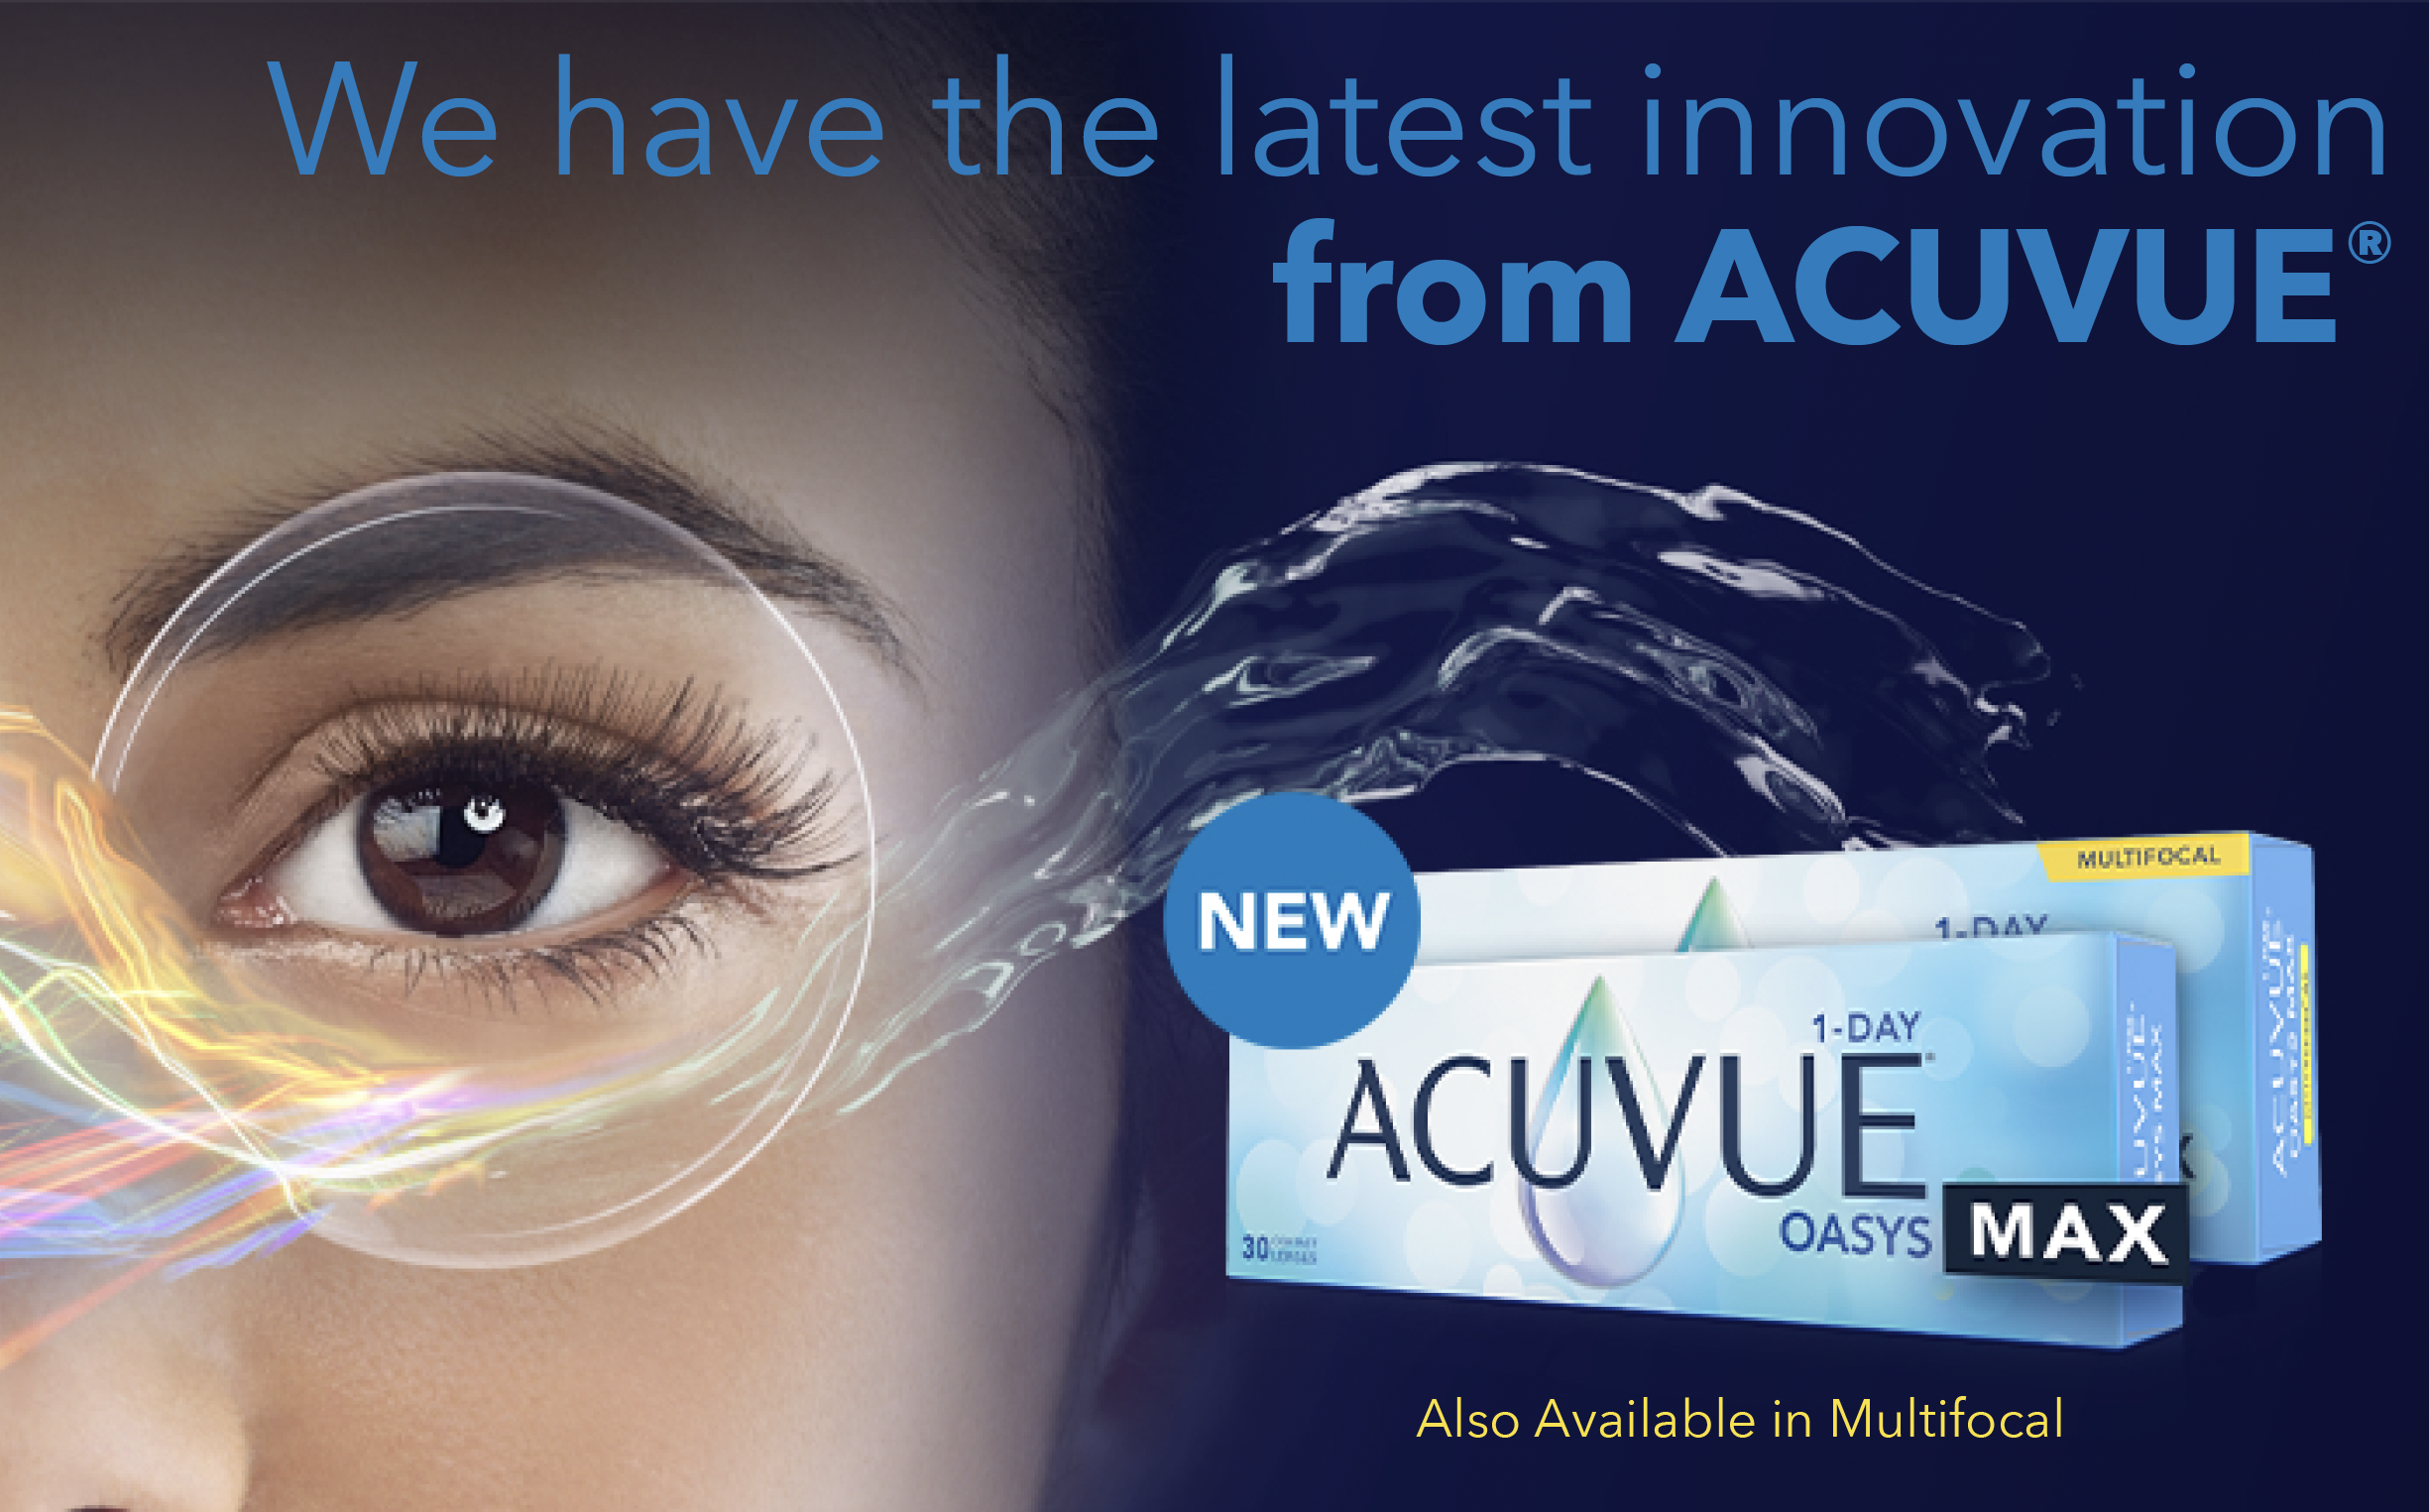 We have the latest innovation from Acuvue. eye model next to box shot of the new Acuvue Oasys Max contact lens also available in multifocal